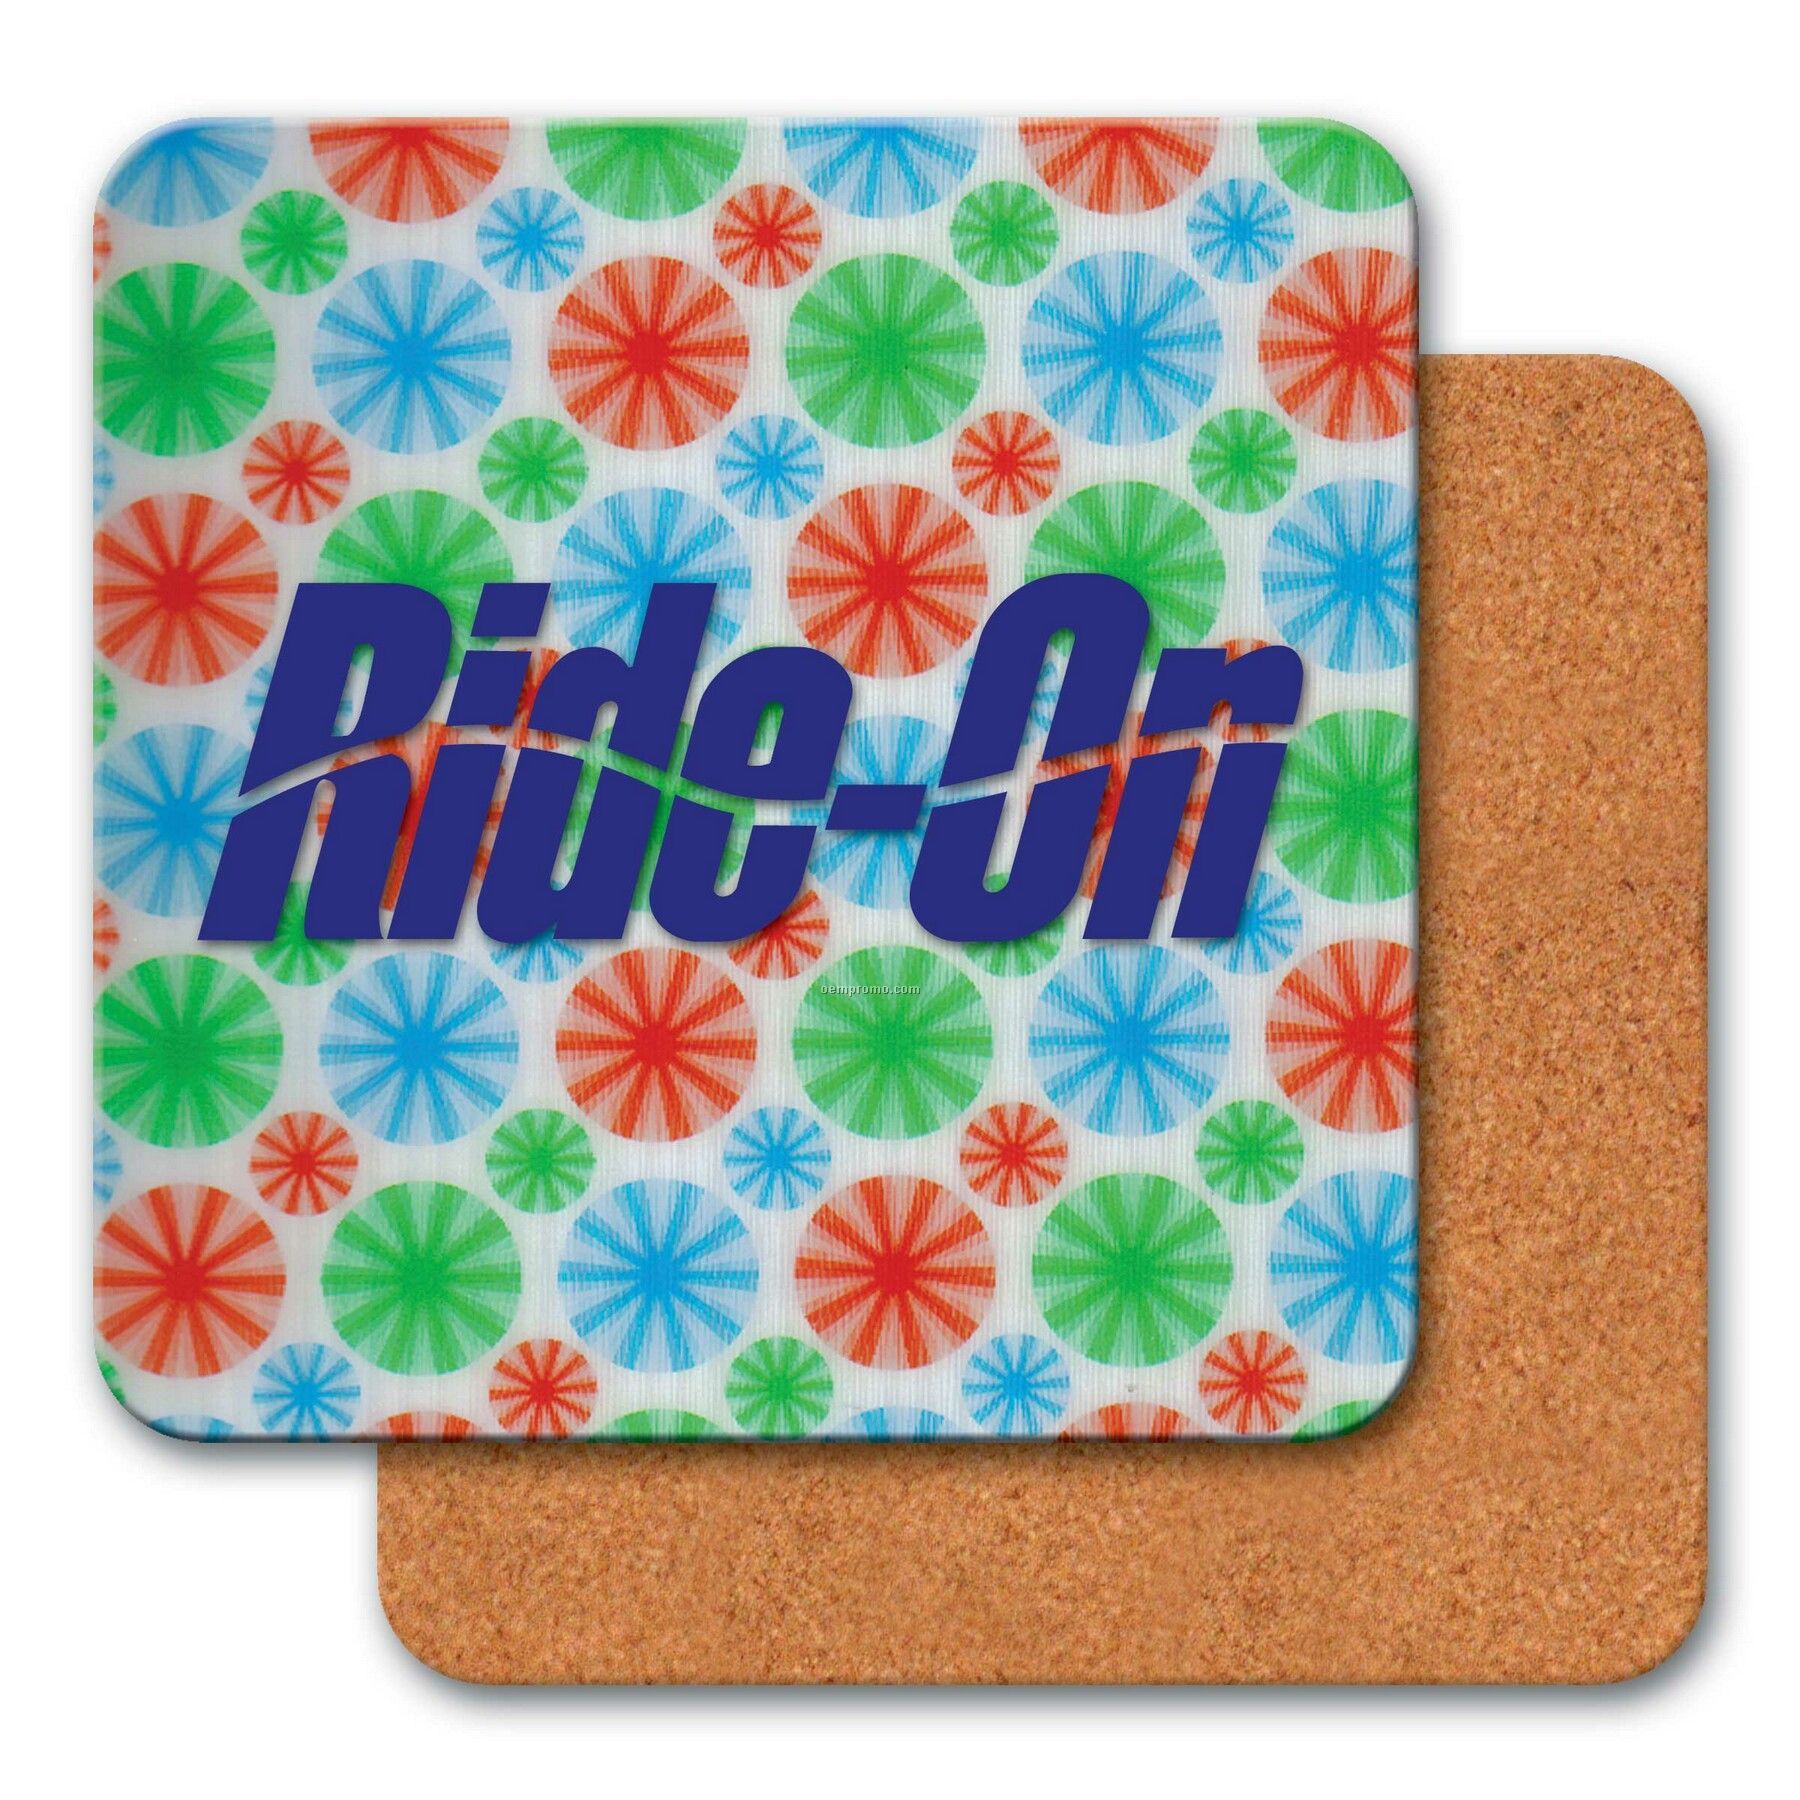 4" Square Coaster W/3d Lenticular Animated Spinning Wheels (Imprinted)